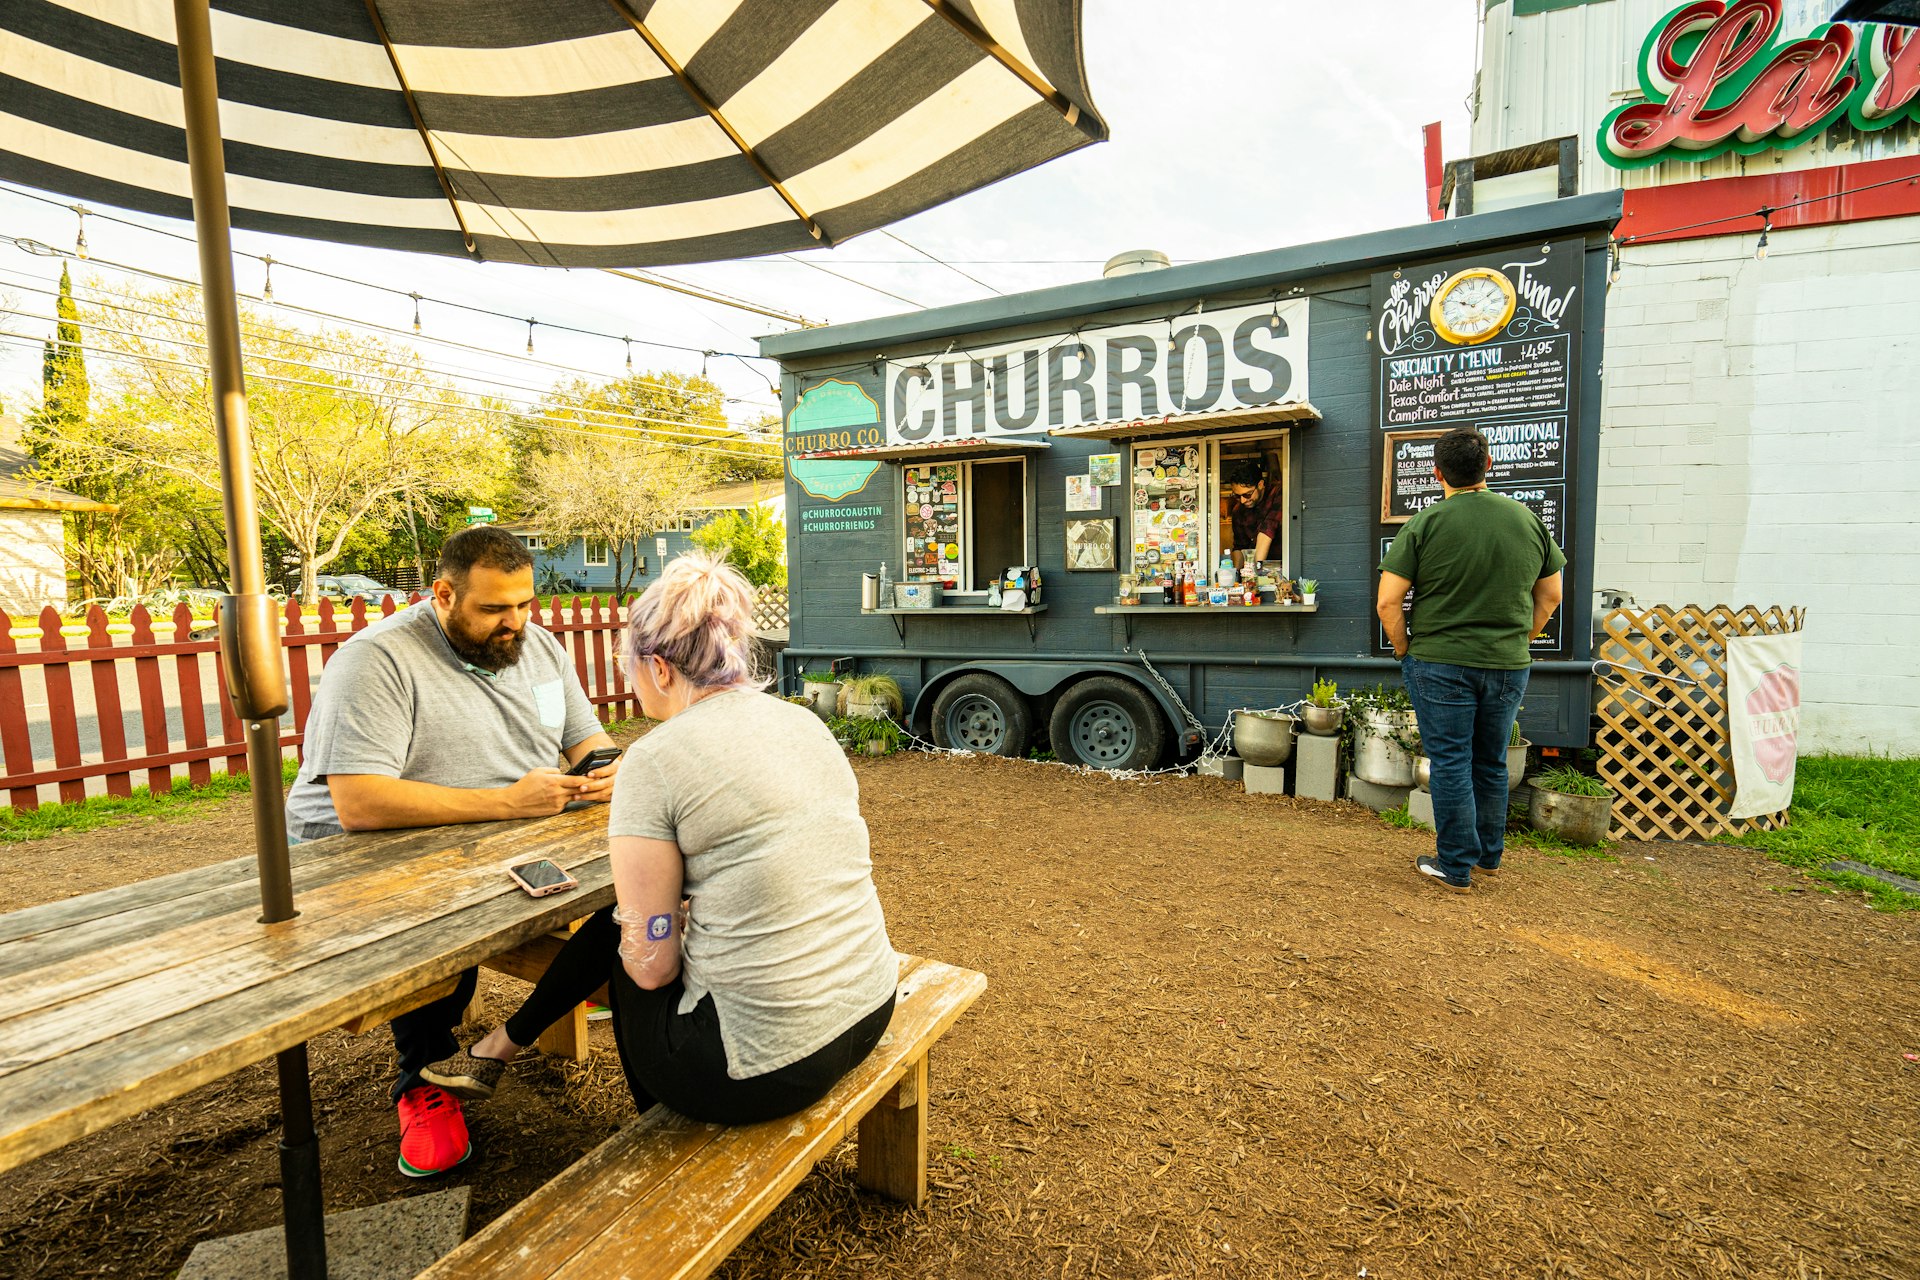 A man and woman sat at a bench eating at a local food truck in Austin, Texas